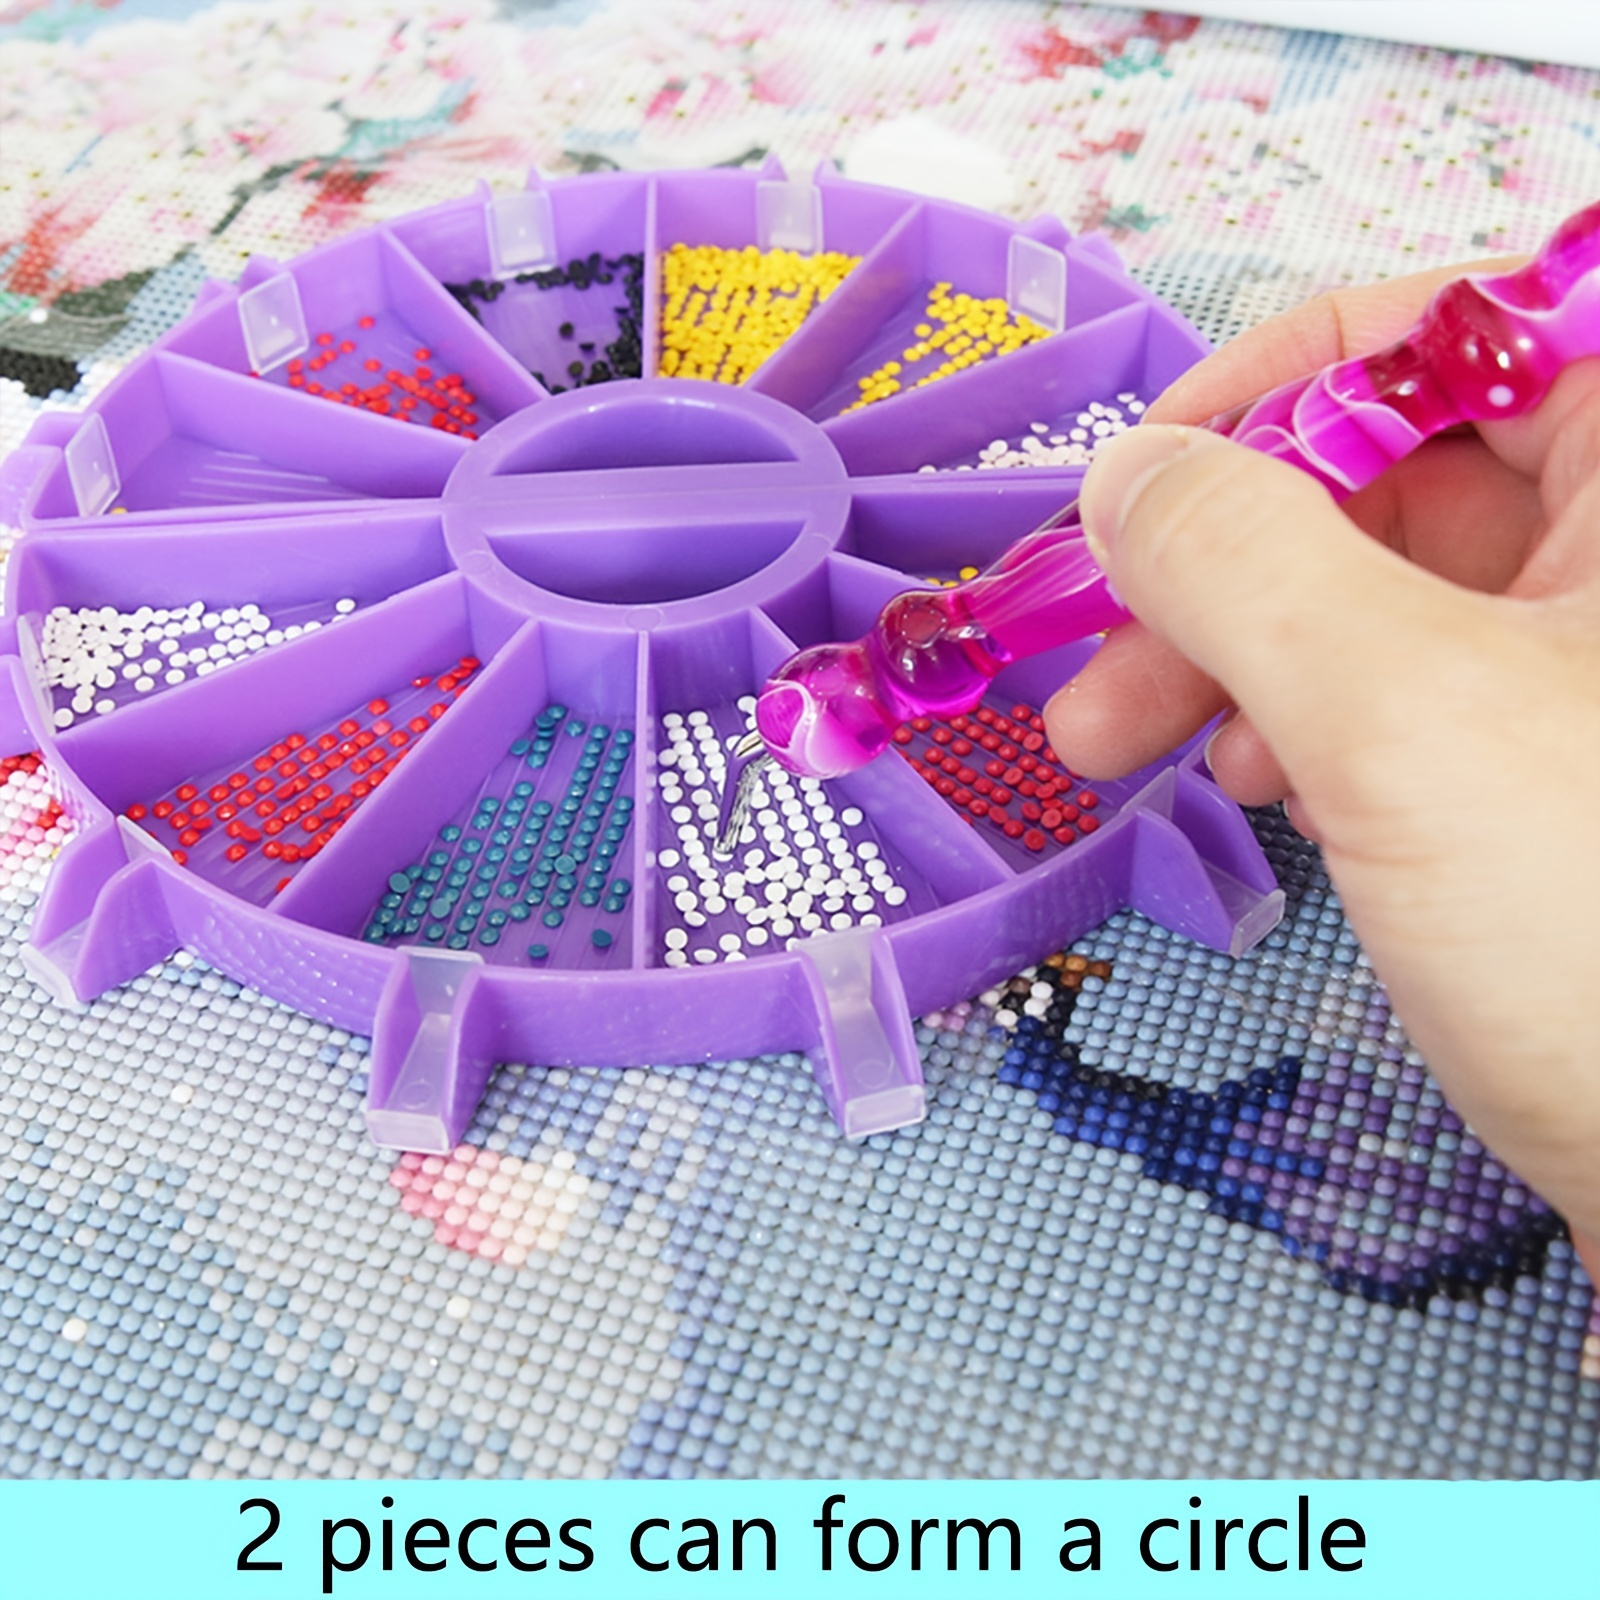 6 Pcs Diamond Painting Trays Large and Small,Plastic Bead Sorting